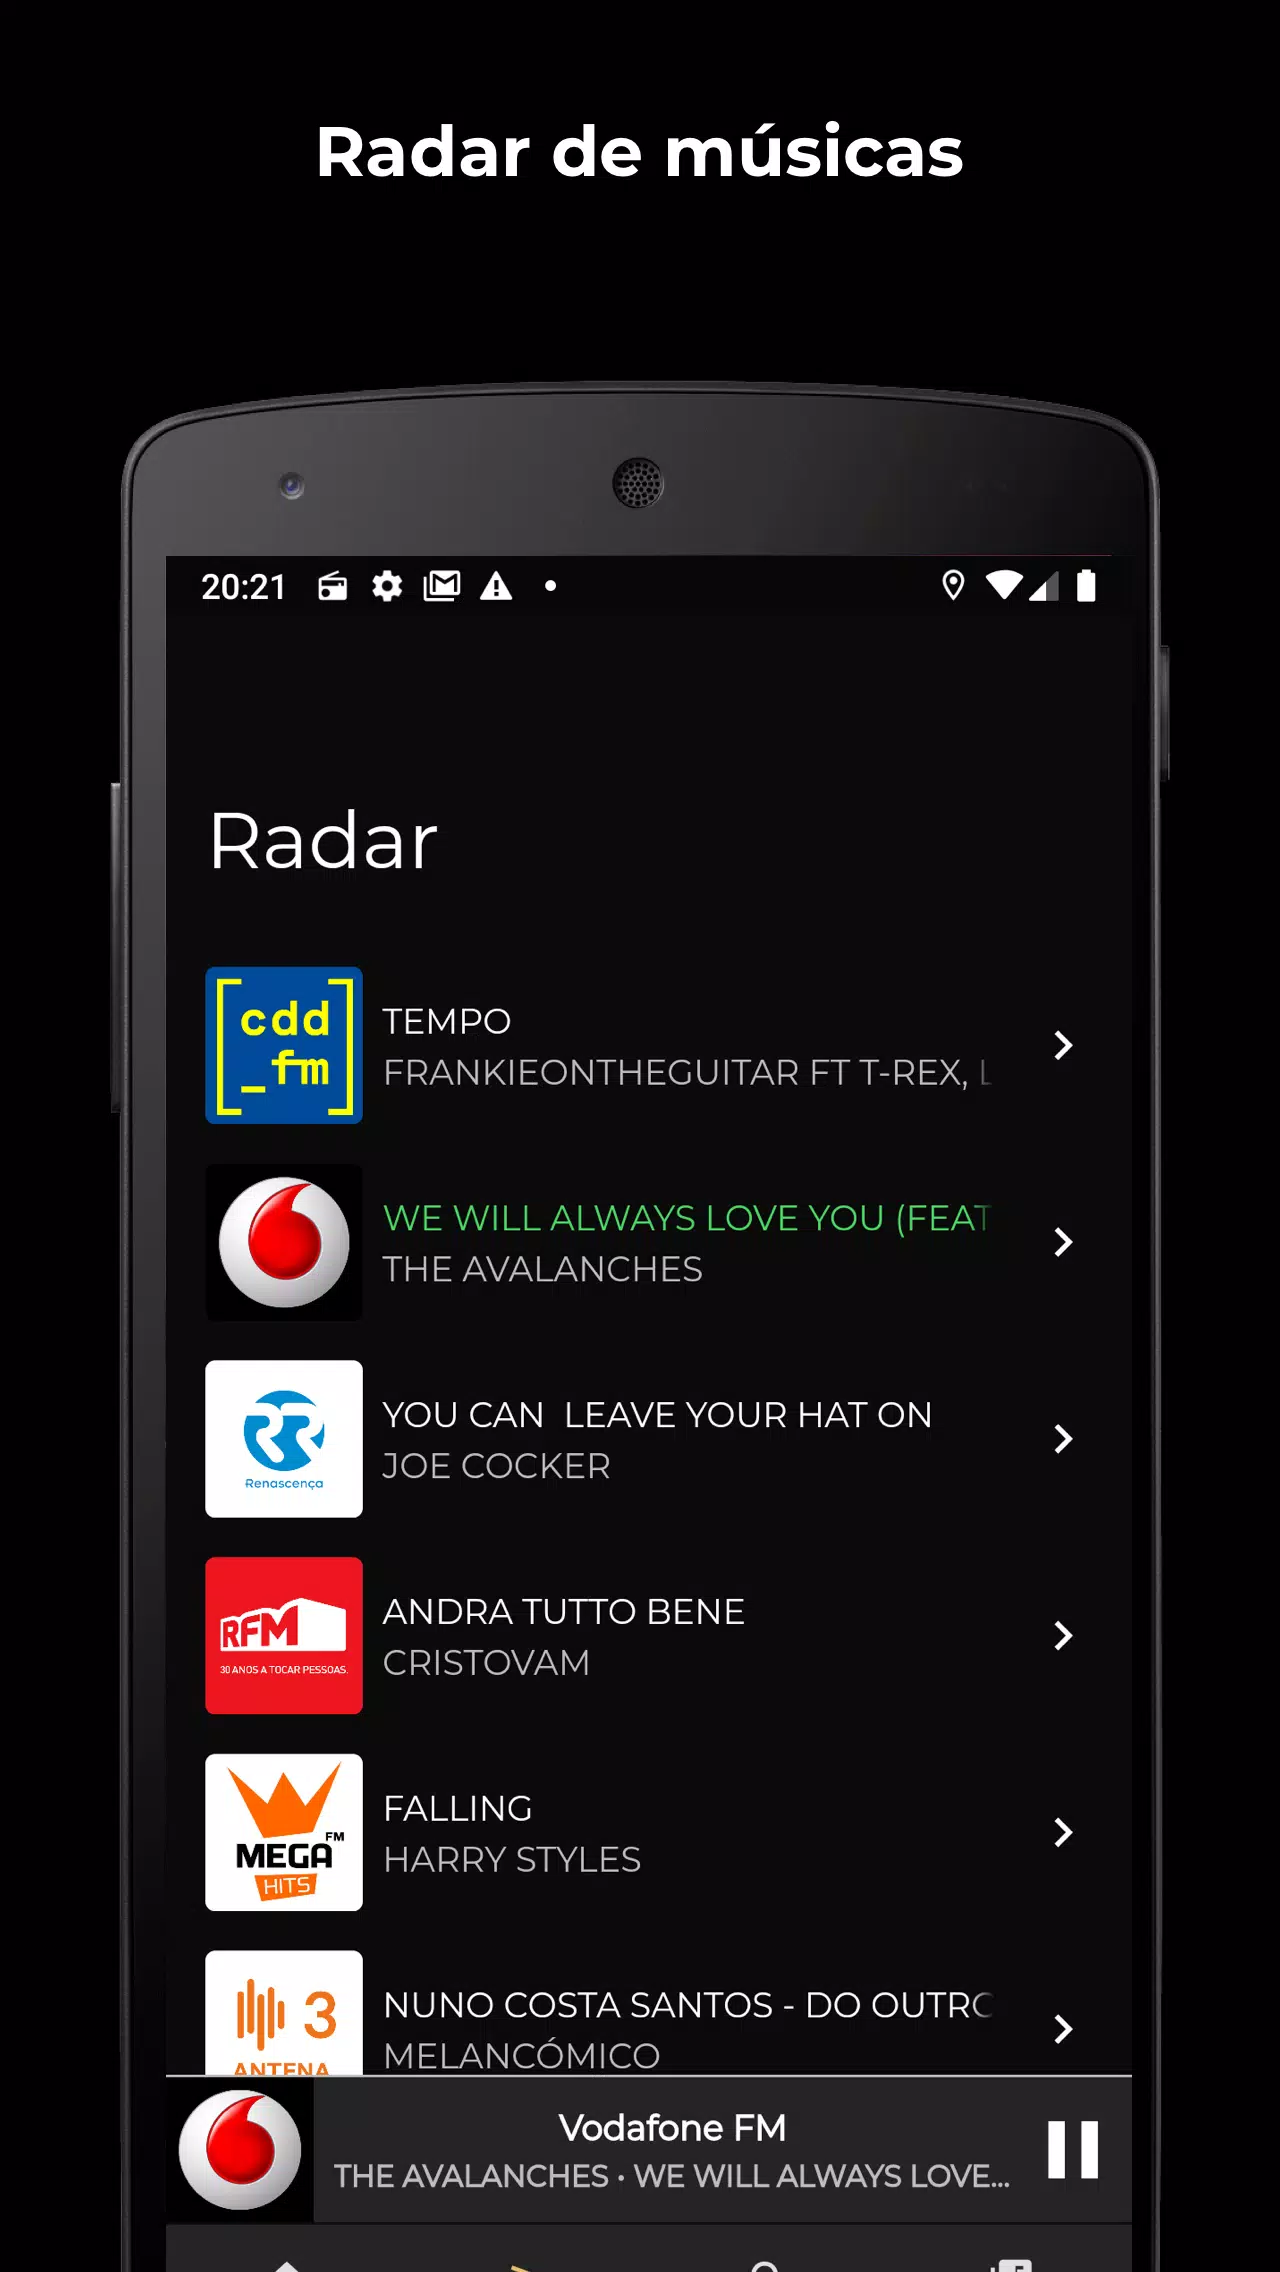 Rádio Tuga - Portugal Online for Android - APK Download